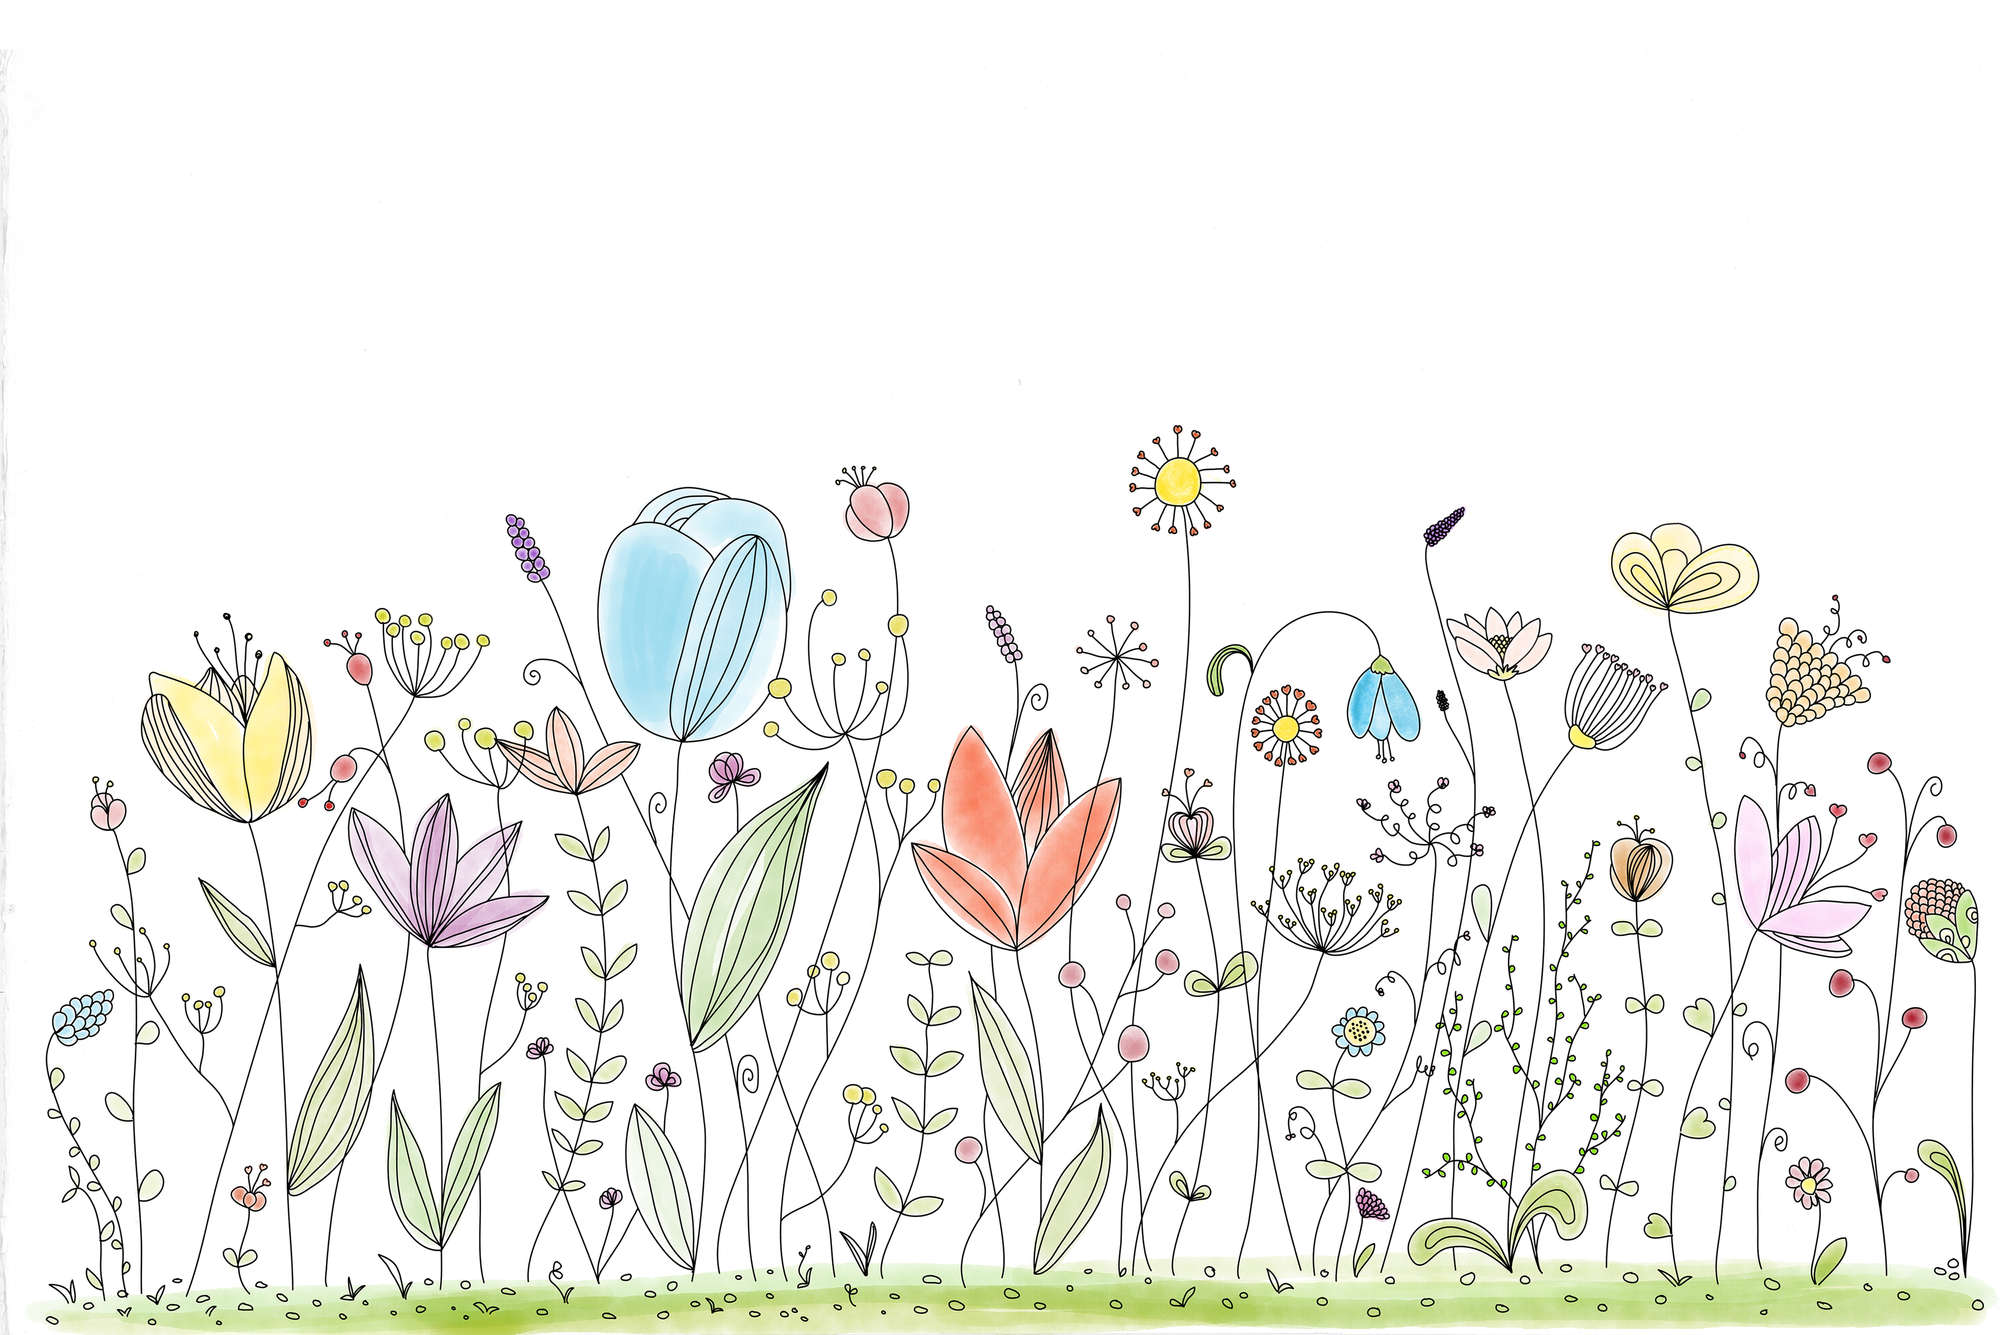             Children mural with colourful drawn flowers on matte smooth non-woven
        